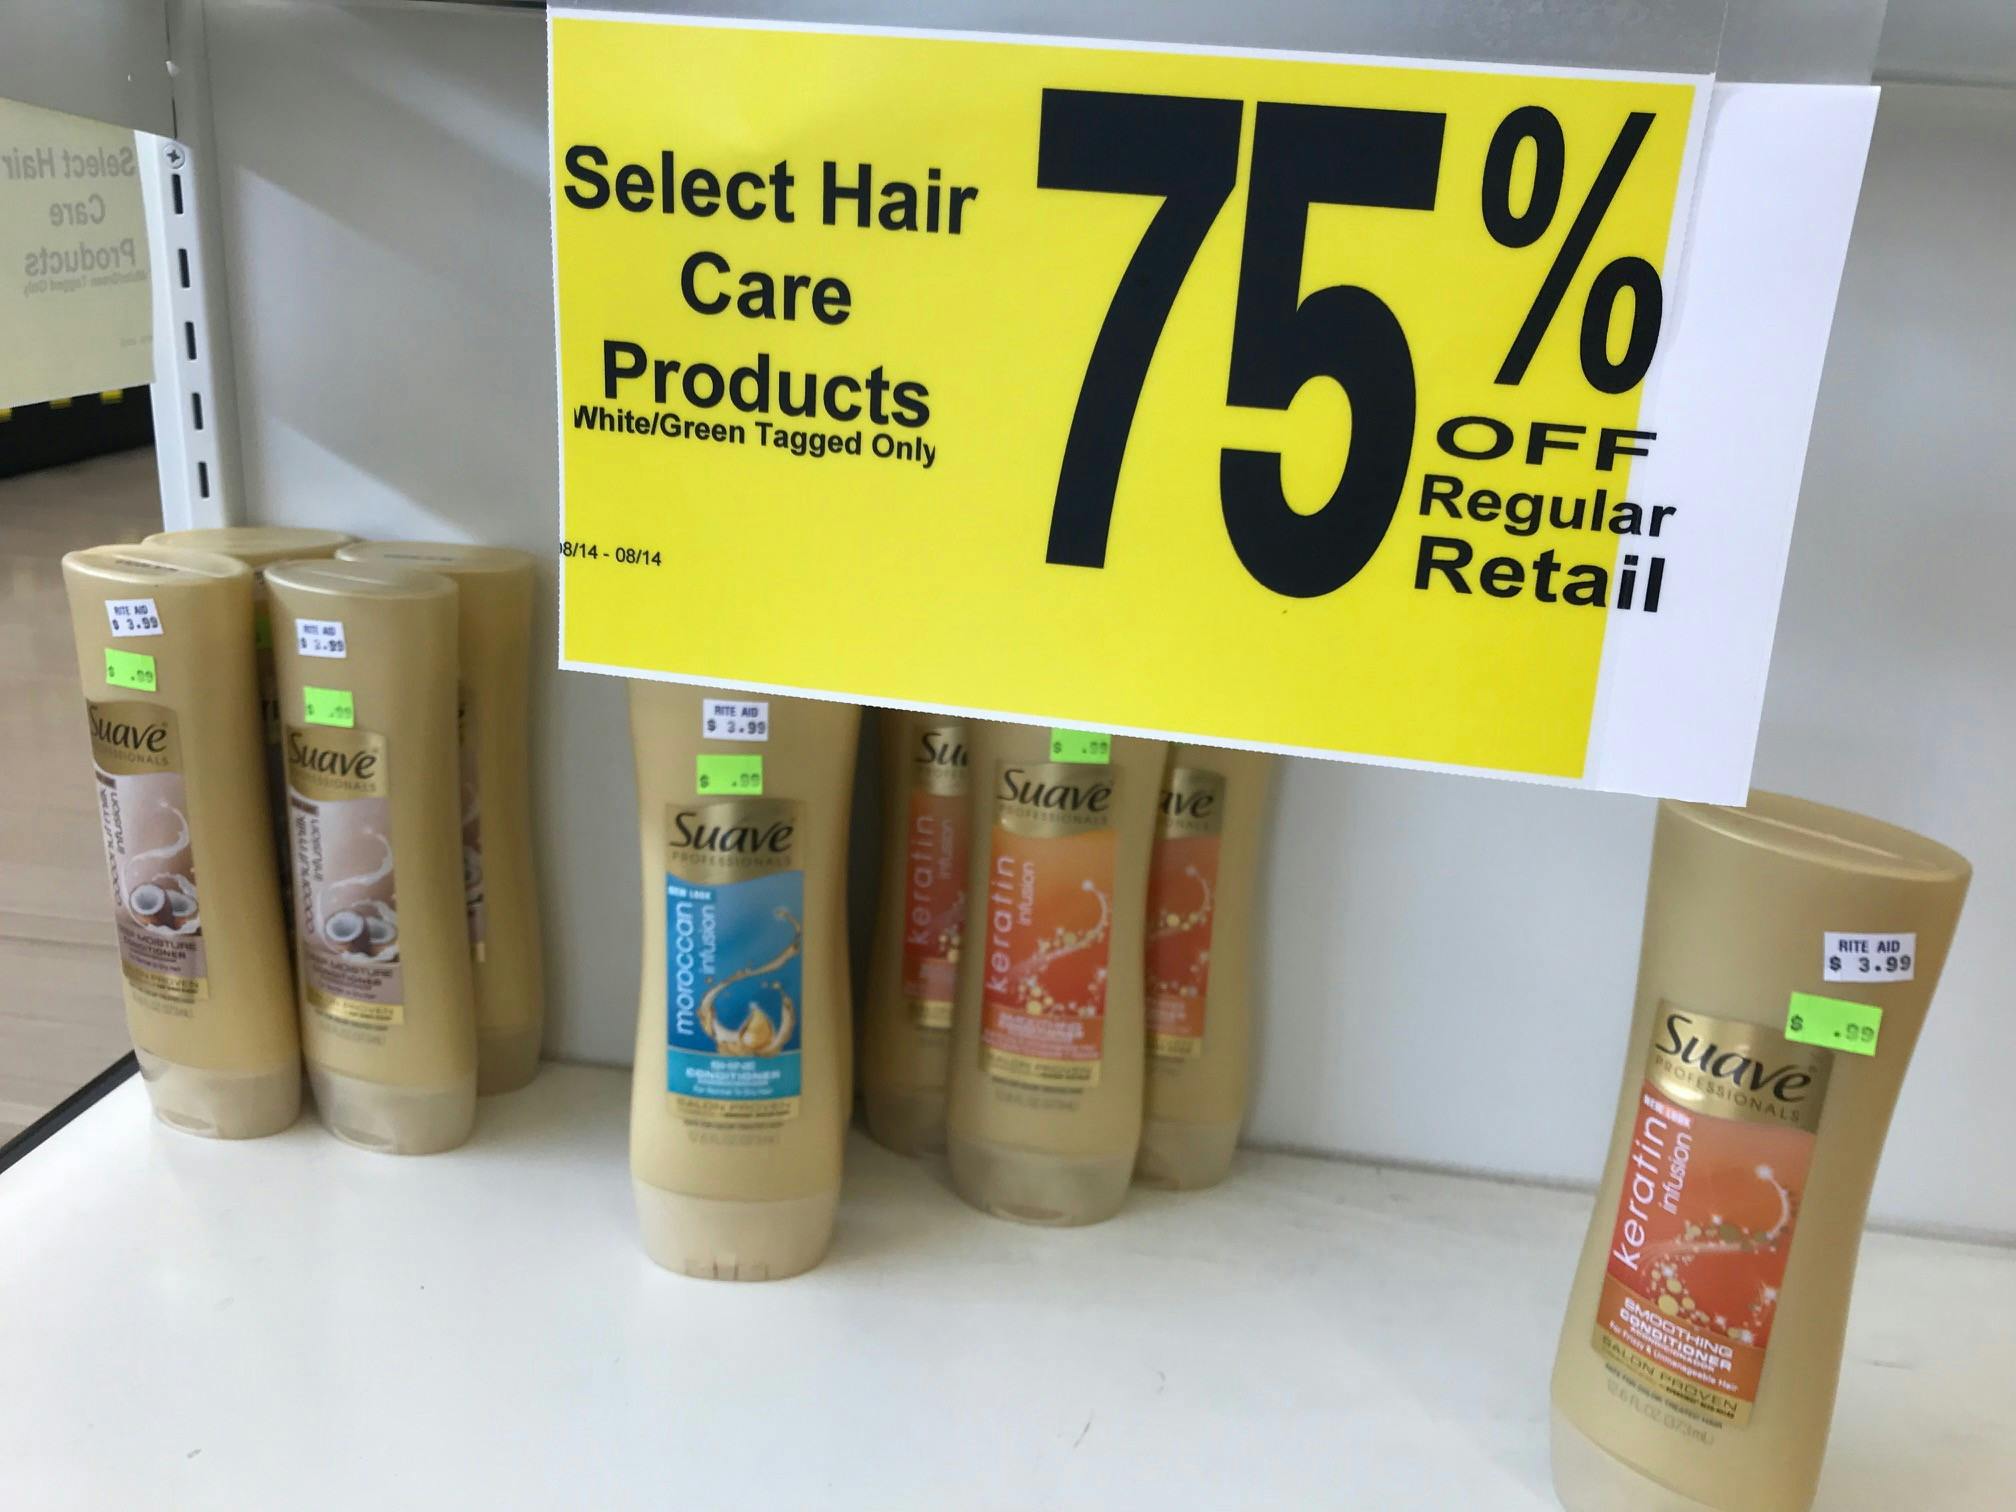 Clearance shelf with hair care and a sign that says, "select hair care products 75% off.